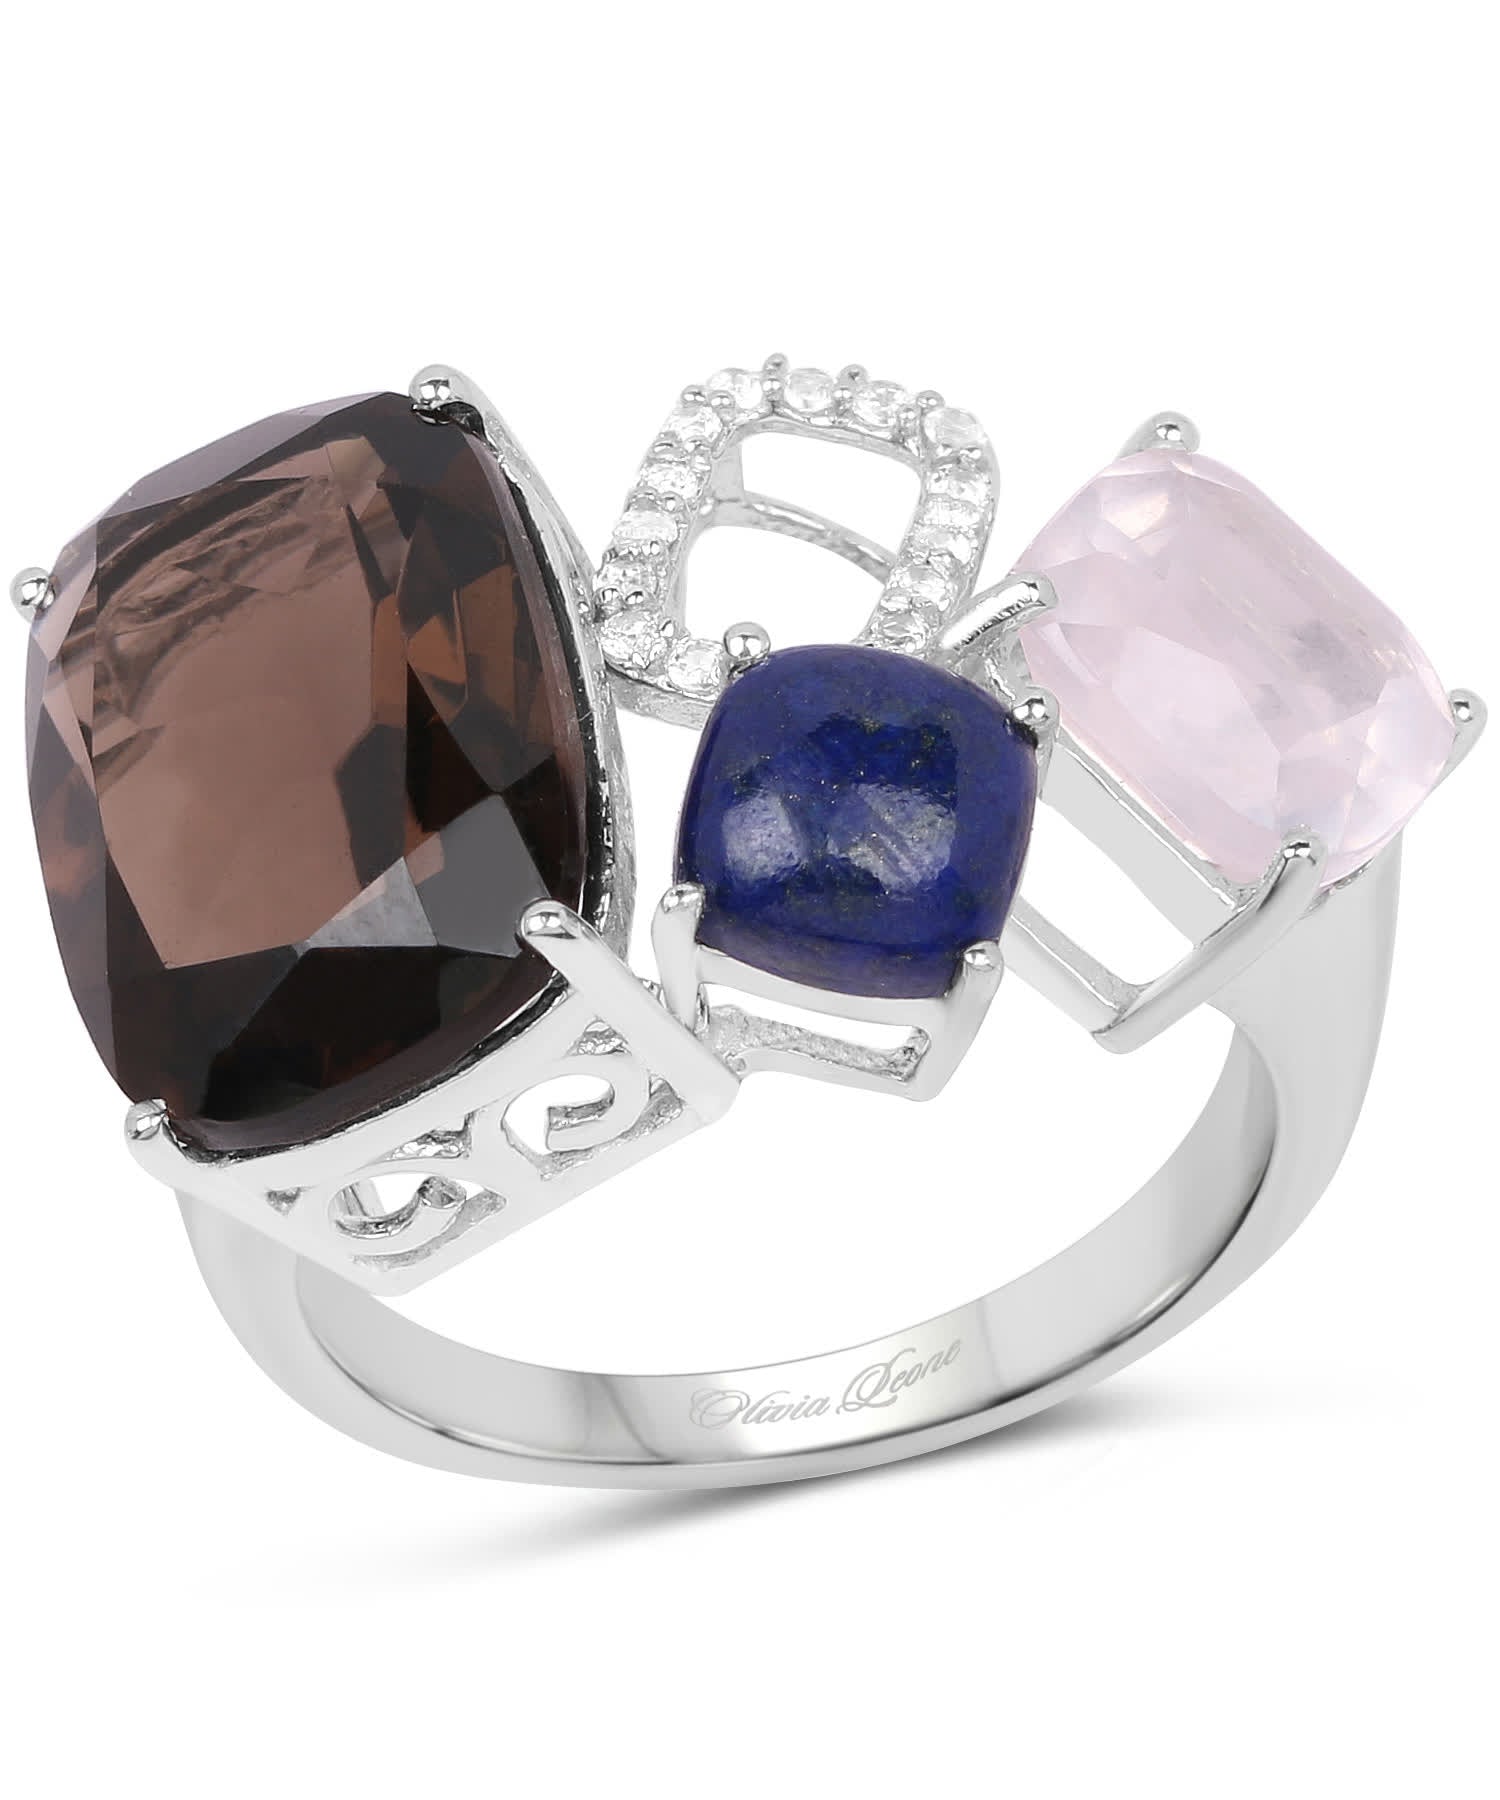 Olivia Leone 7.51ctw Natural Smoky and Rose Quartz, Lapis Lazuli and Topaz Rhodium Plated 925 Sterling Silver Designer Ring View 1